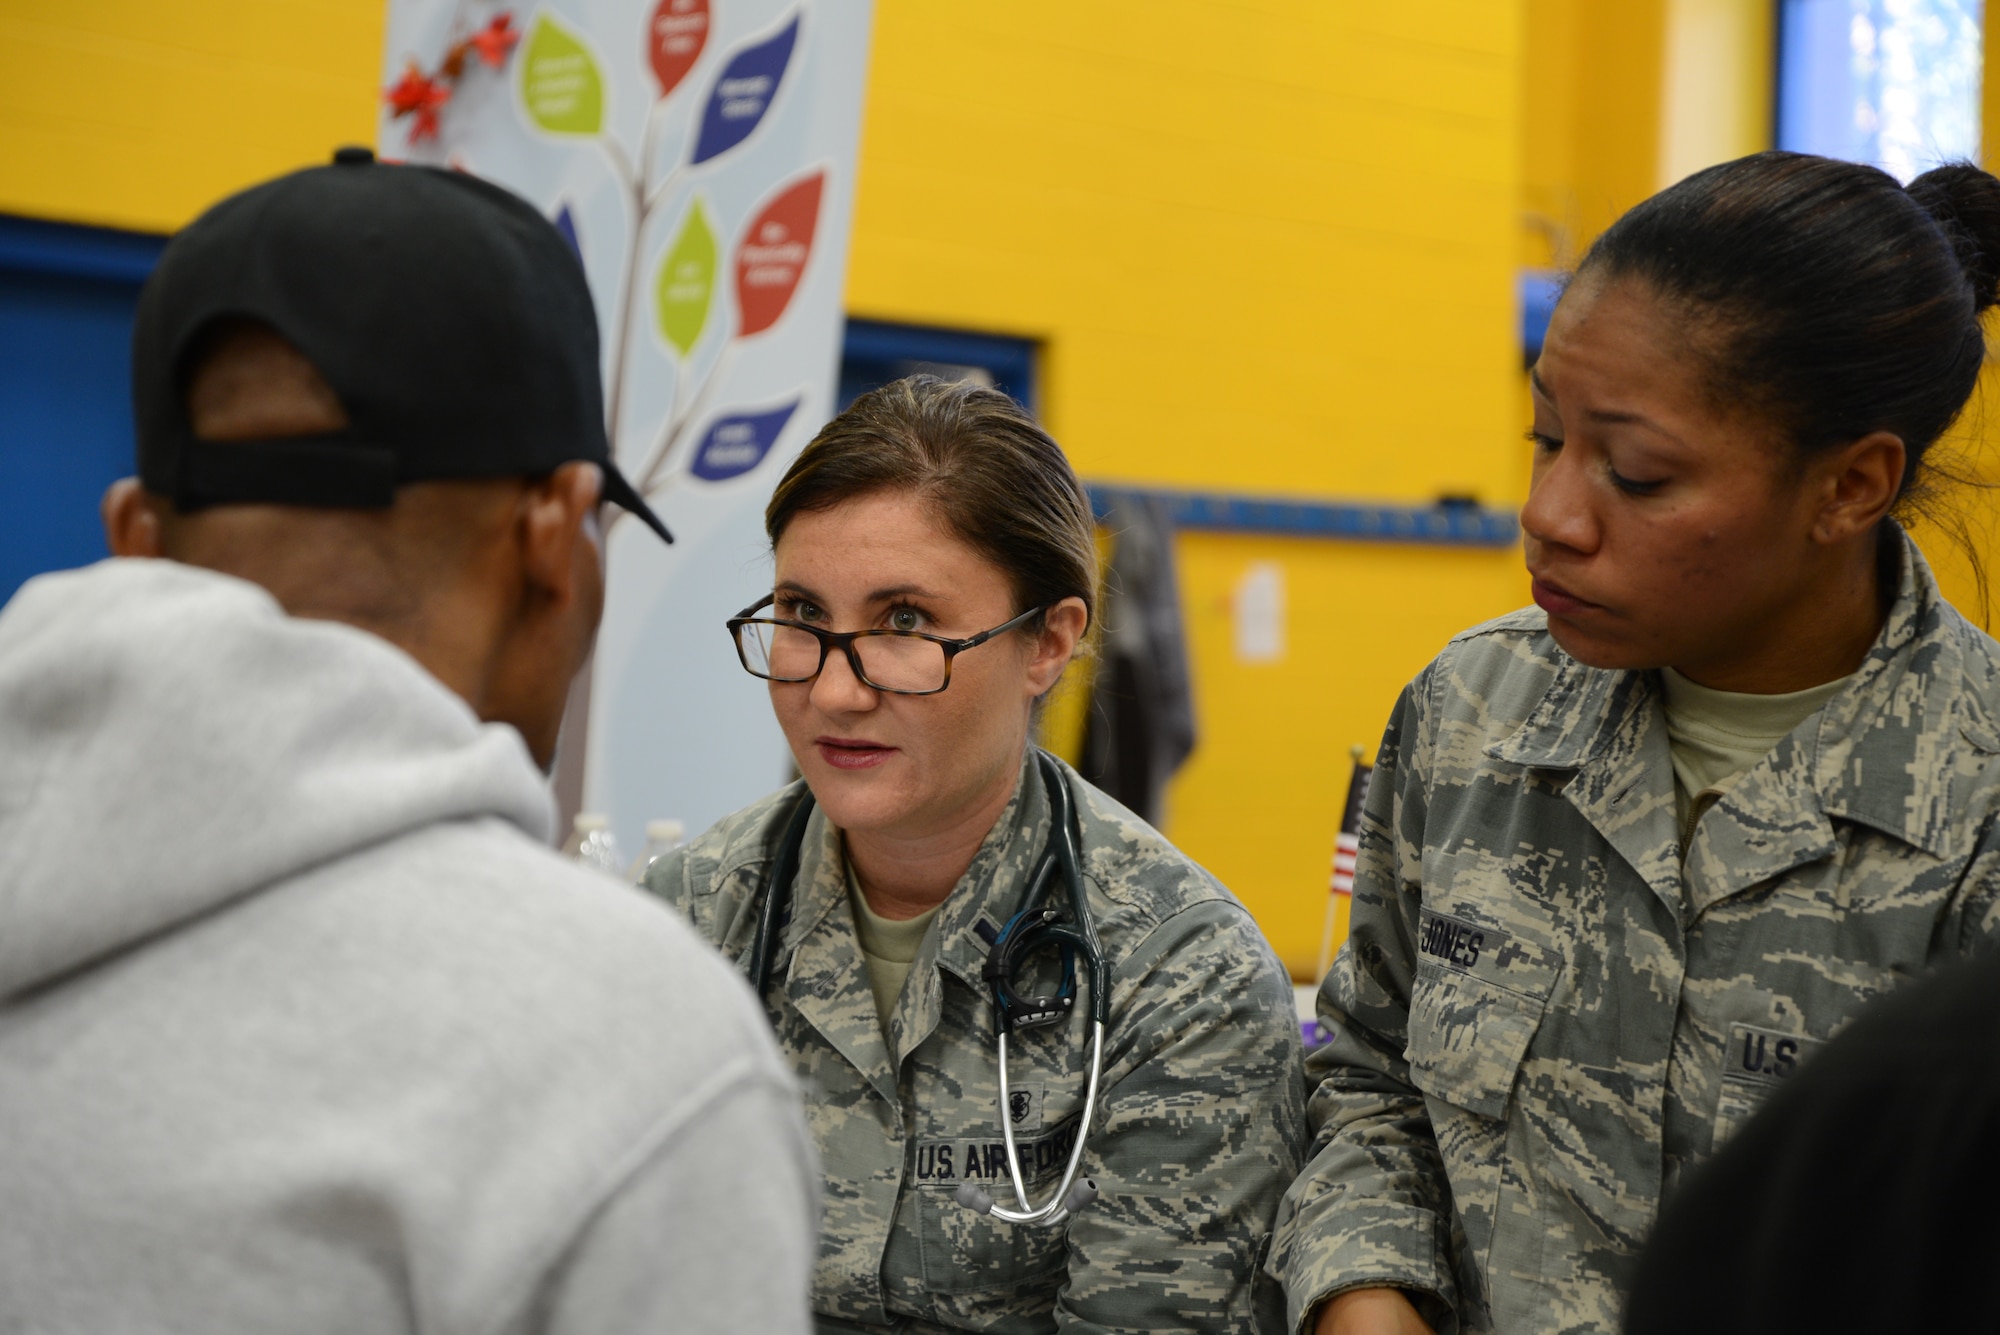 1st Lt. Sara Kucharski and Staff Sgt. Stefany Jones, 108th Medical Group, New Jersey Air National Guard, check the blood pressure of a homeless veteran at the New Jersey Department of Military and Veterans Affairs Stand Down Day at the John F. Kennedy recreation center in Newark, N.J. On Oct. 10, 2015. The stand down day allows the veterans to get much needed care and services from a wide array of state agencies and nonprofit organizations. Members of the 108th Medical Group have been providing care at stand down days for more than 10 years and were providing blood pressure checks as a means to have conversations with the veterans about their overall health and wellness. Stand Down is a military term referring to exhausted combat units that were removed from the battlefront to a place of security and safety for rest and recovery. Today, Stand Downs are grass roots, community-based intervention program to help veterans' battle life on the streets. (U.S. Air National Guard photo by Master Sgt. Carl Clegg, Released)

